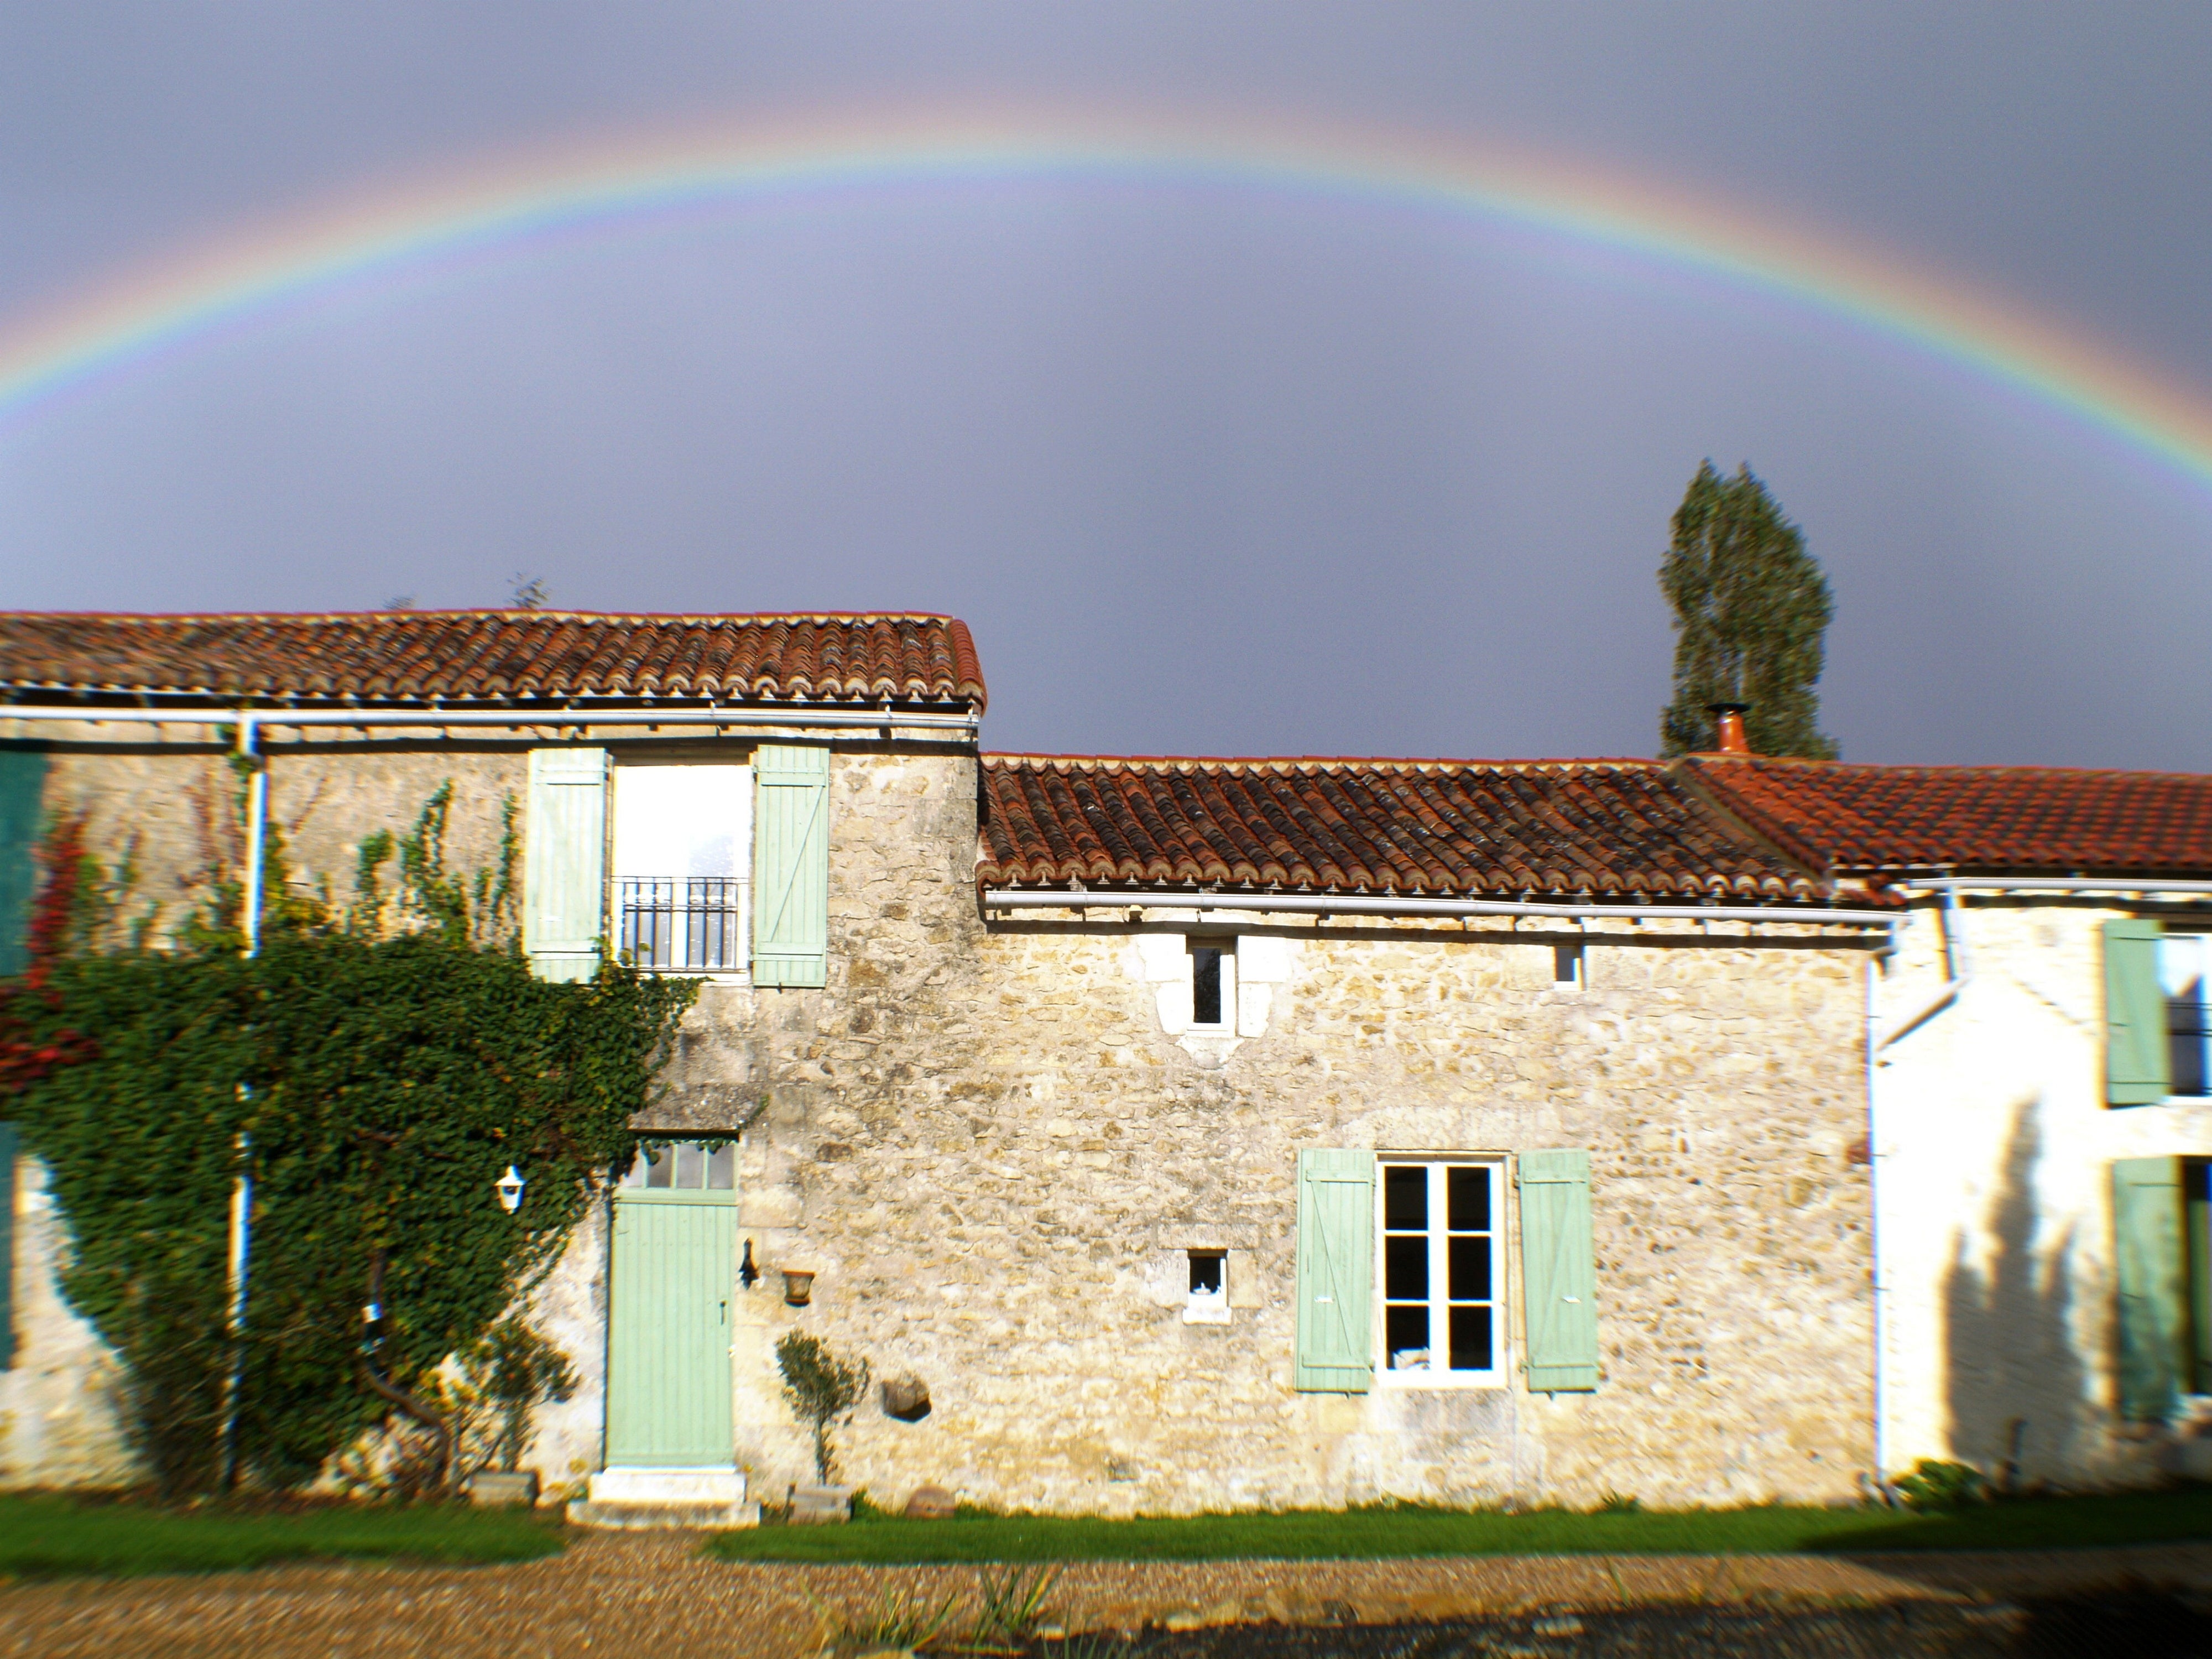 Liz and David Murphy purchased the historic rural hamlet of Lac De Maison, in Poitou-Charentes, south west France, in January 2021